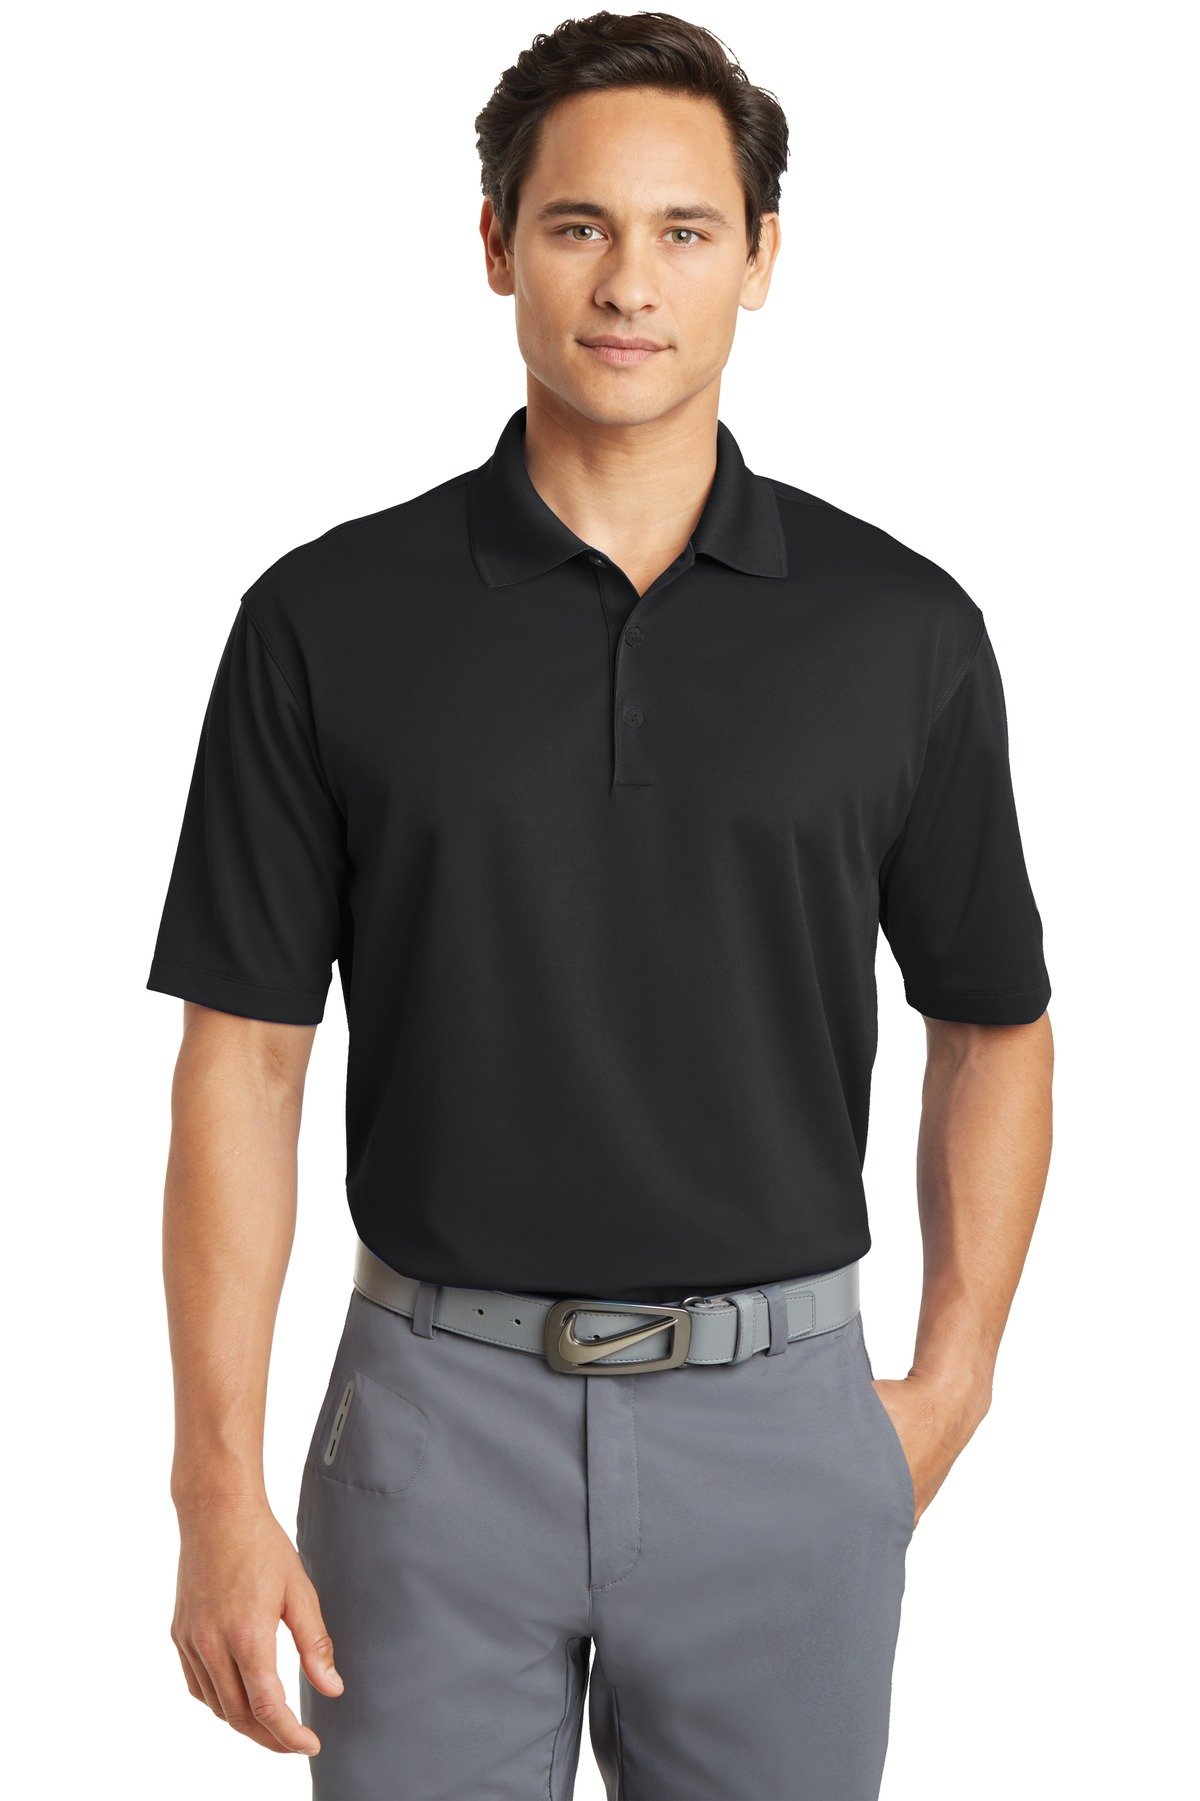 Front view of Tall Dri-FIT Micro Pique Polo